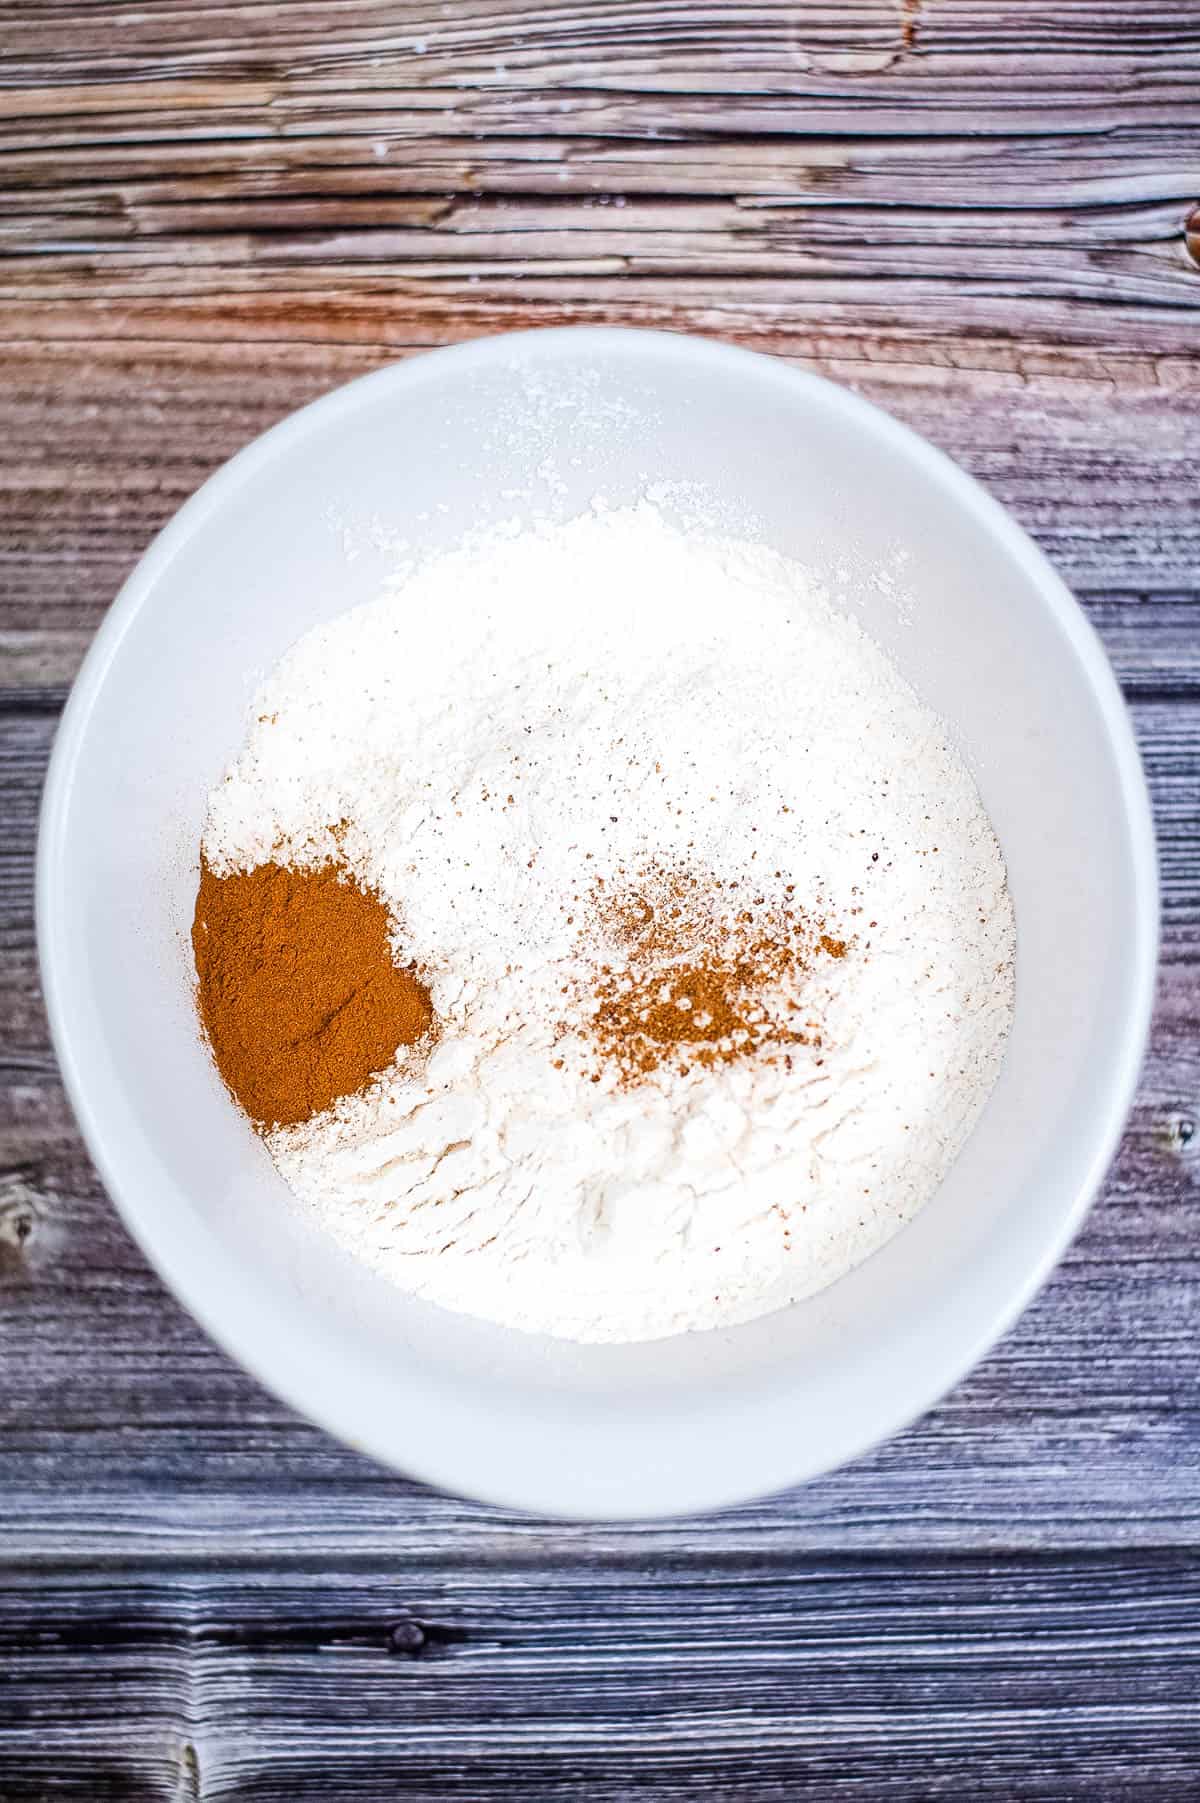 A festive white bowl filled with cinnamon and powdered sugar, perfect for serving eggnog bundt cake.